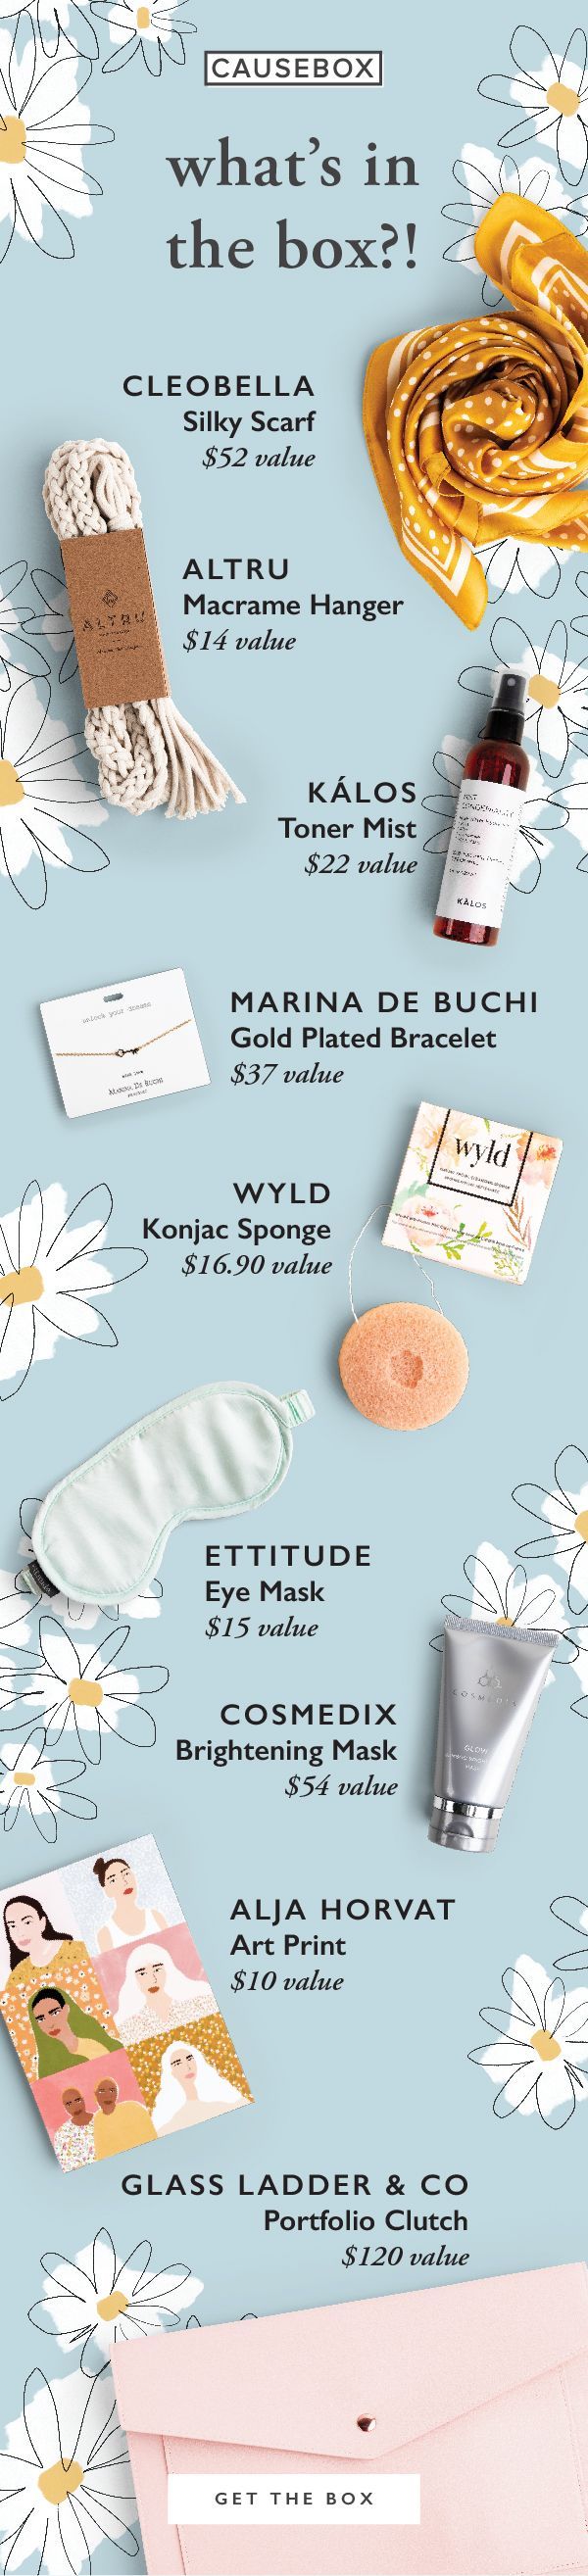 Say hello to our highly anticipated рџЊё Spring рџЊё Box! For only $49.95, this box includes ethical & beautiful products worth $330+ рџ?Ќ  Don’t wait to make it yours, because if it’s anything like our last few boxes, this WILL sell out quickly! рџ™Ђ -   23 diy projects Decoration how to make
 ideas